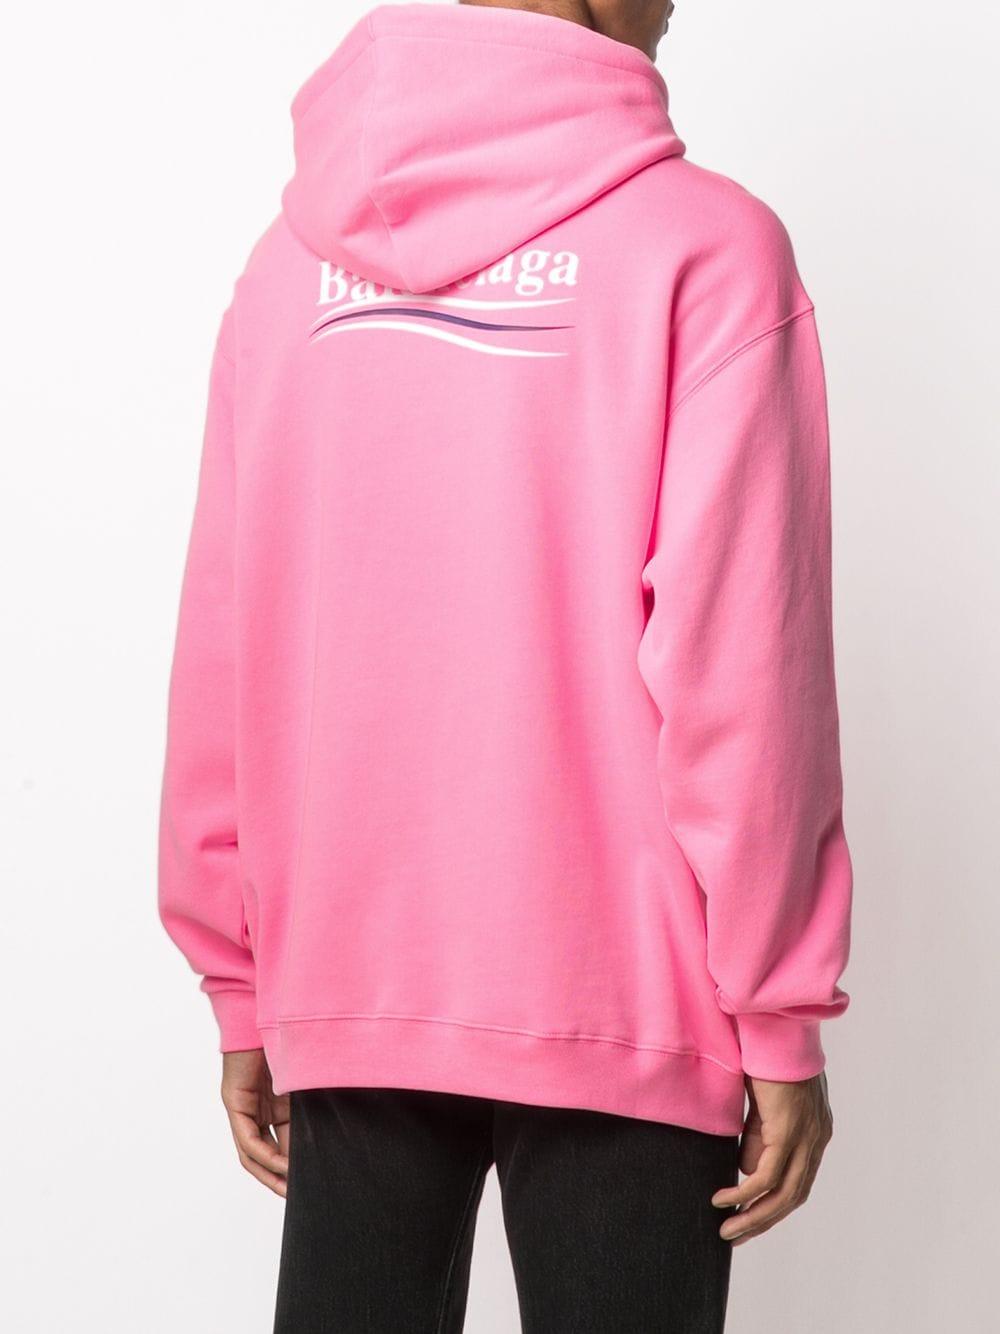 Balenciaga Cotton Campaign Logo Hoodie in Pink for Men - Lyst